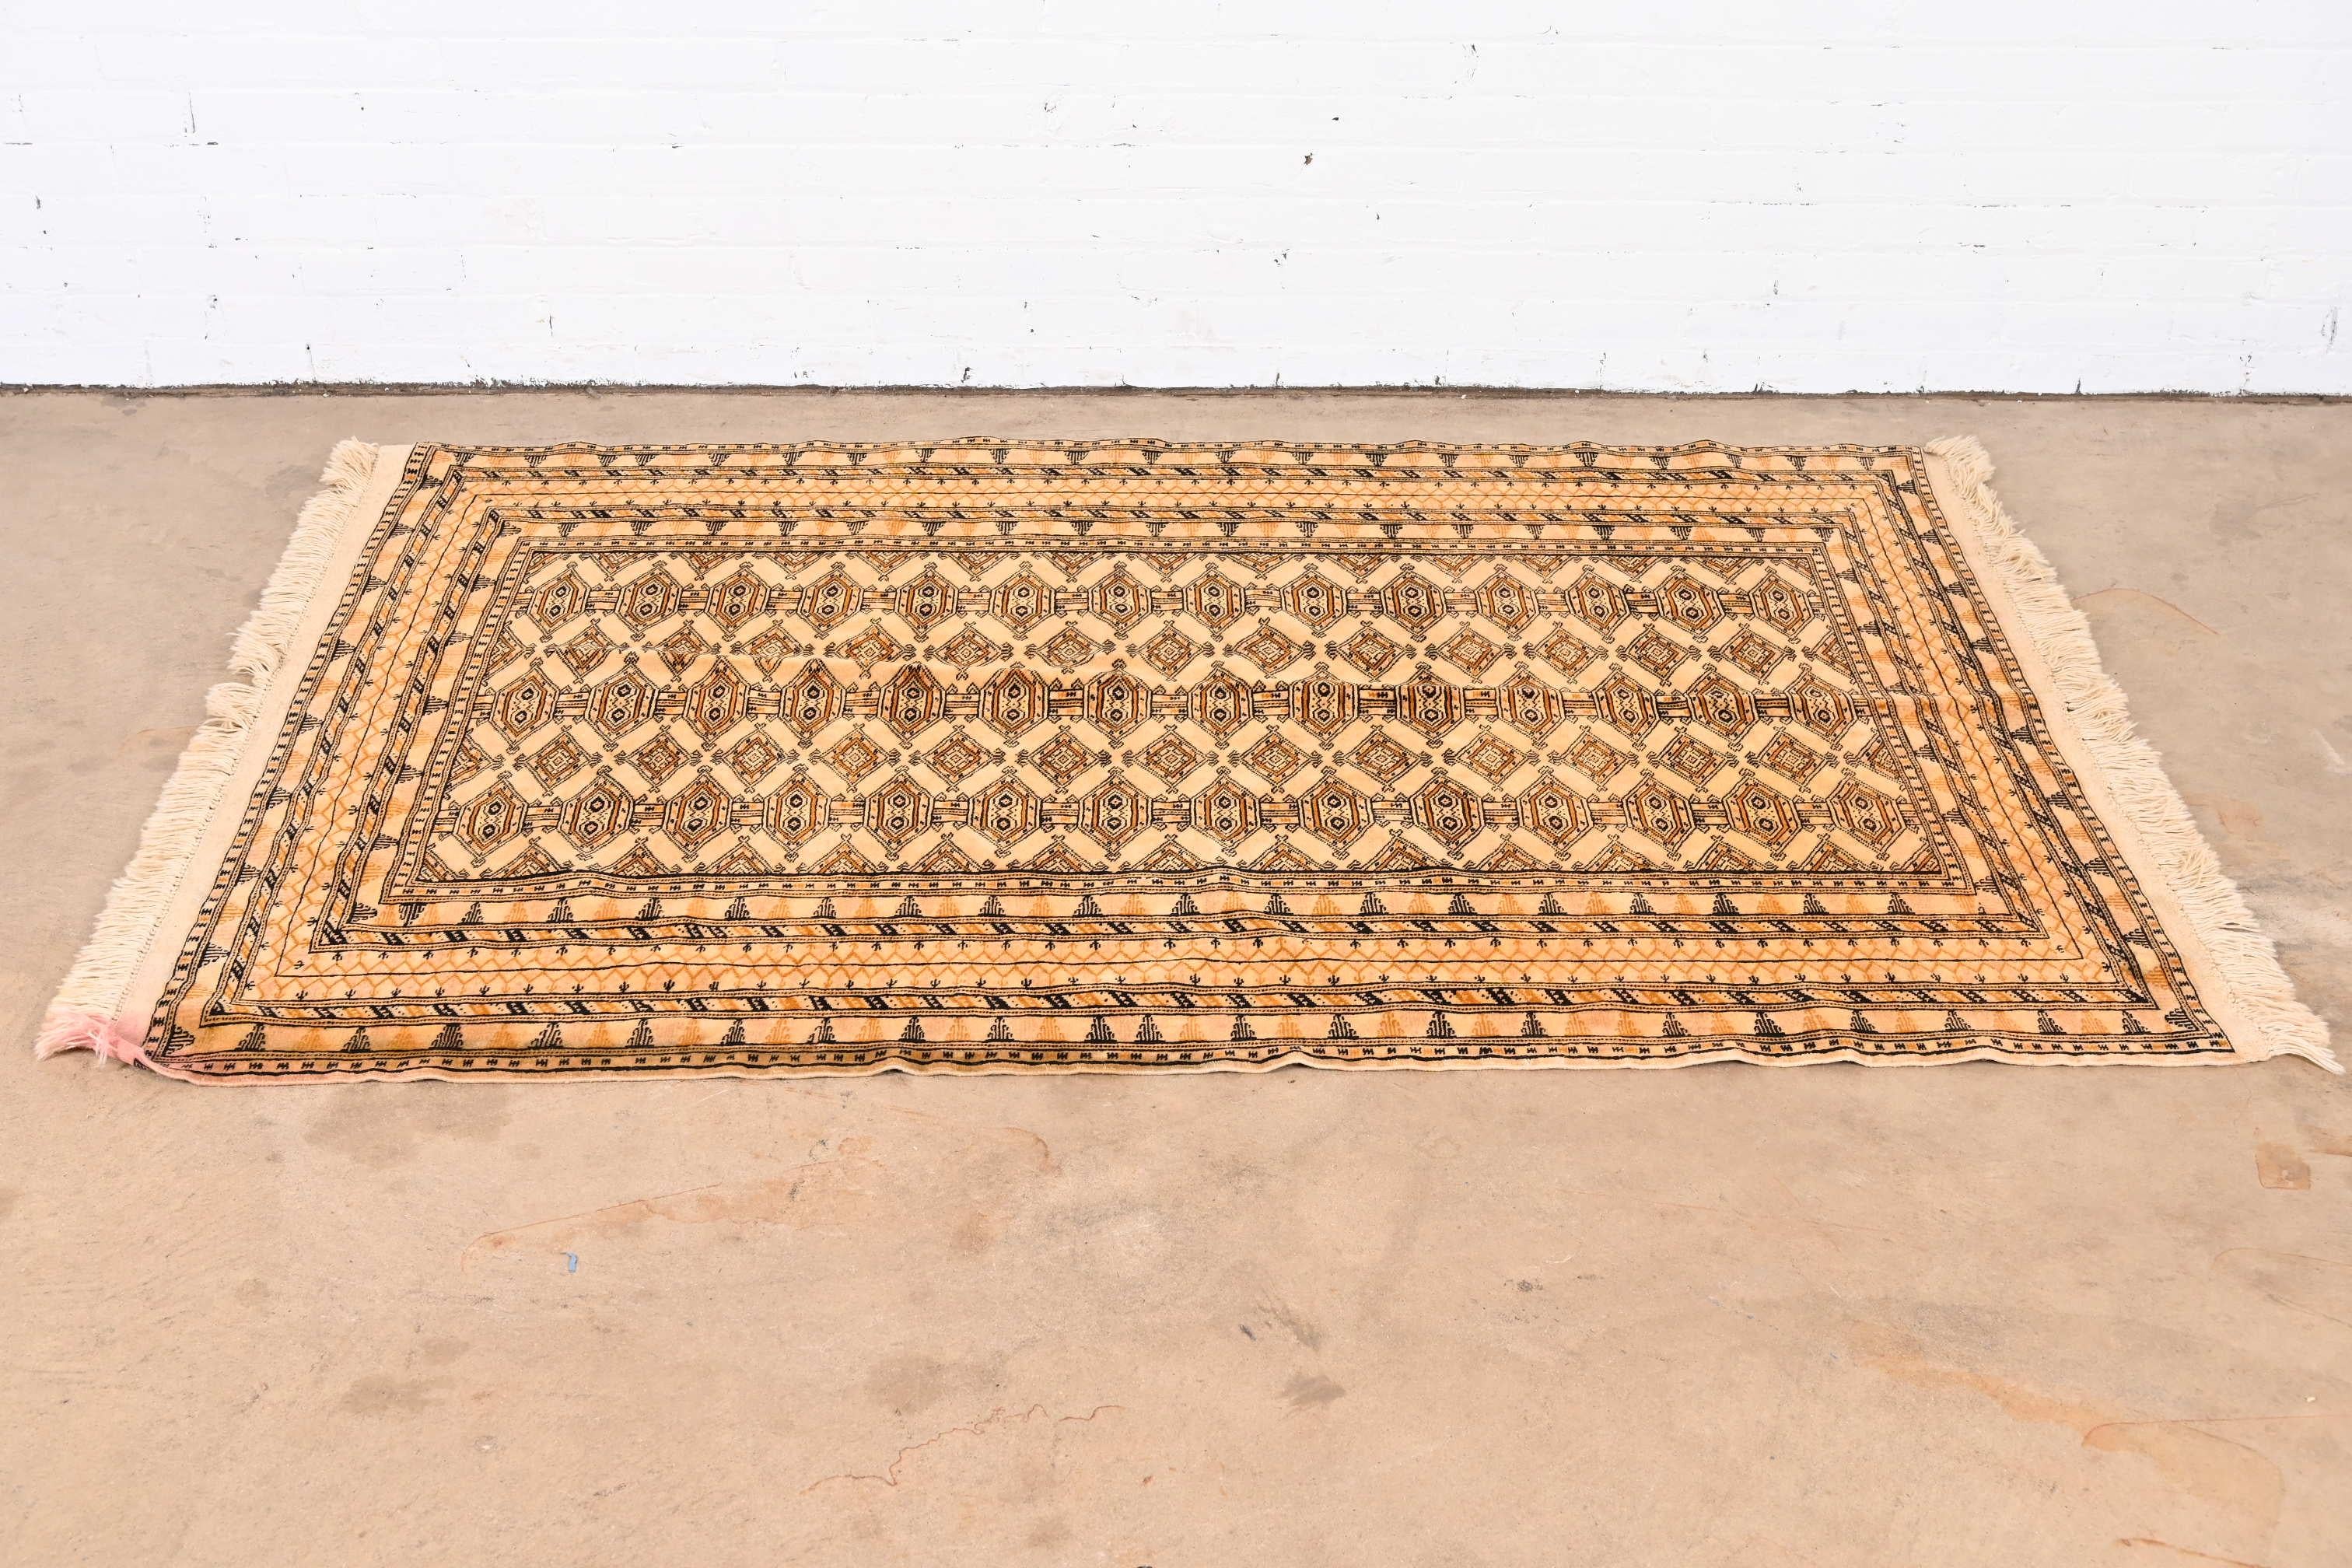 Tribal Vintage Hand-Woven Persian Bokhara Wool Rug in Gold and Black